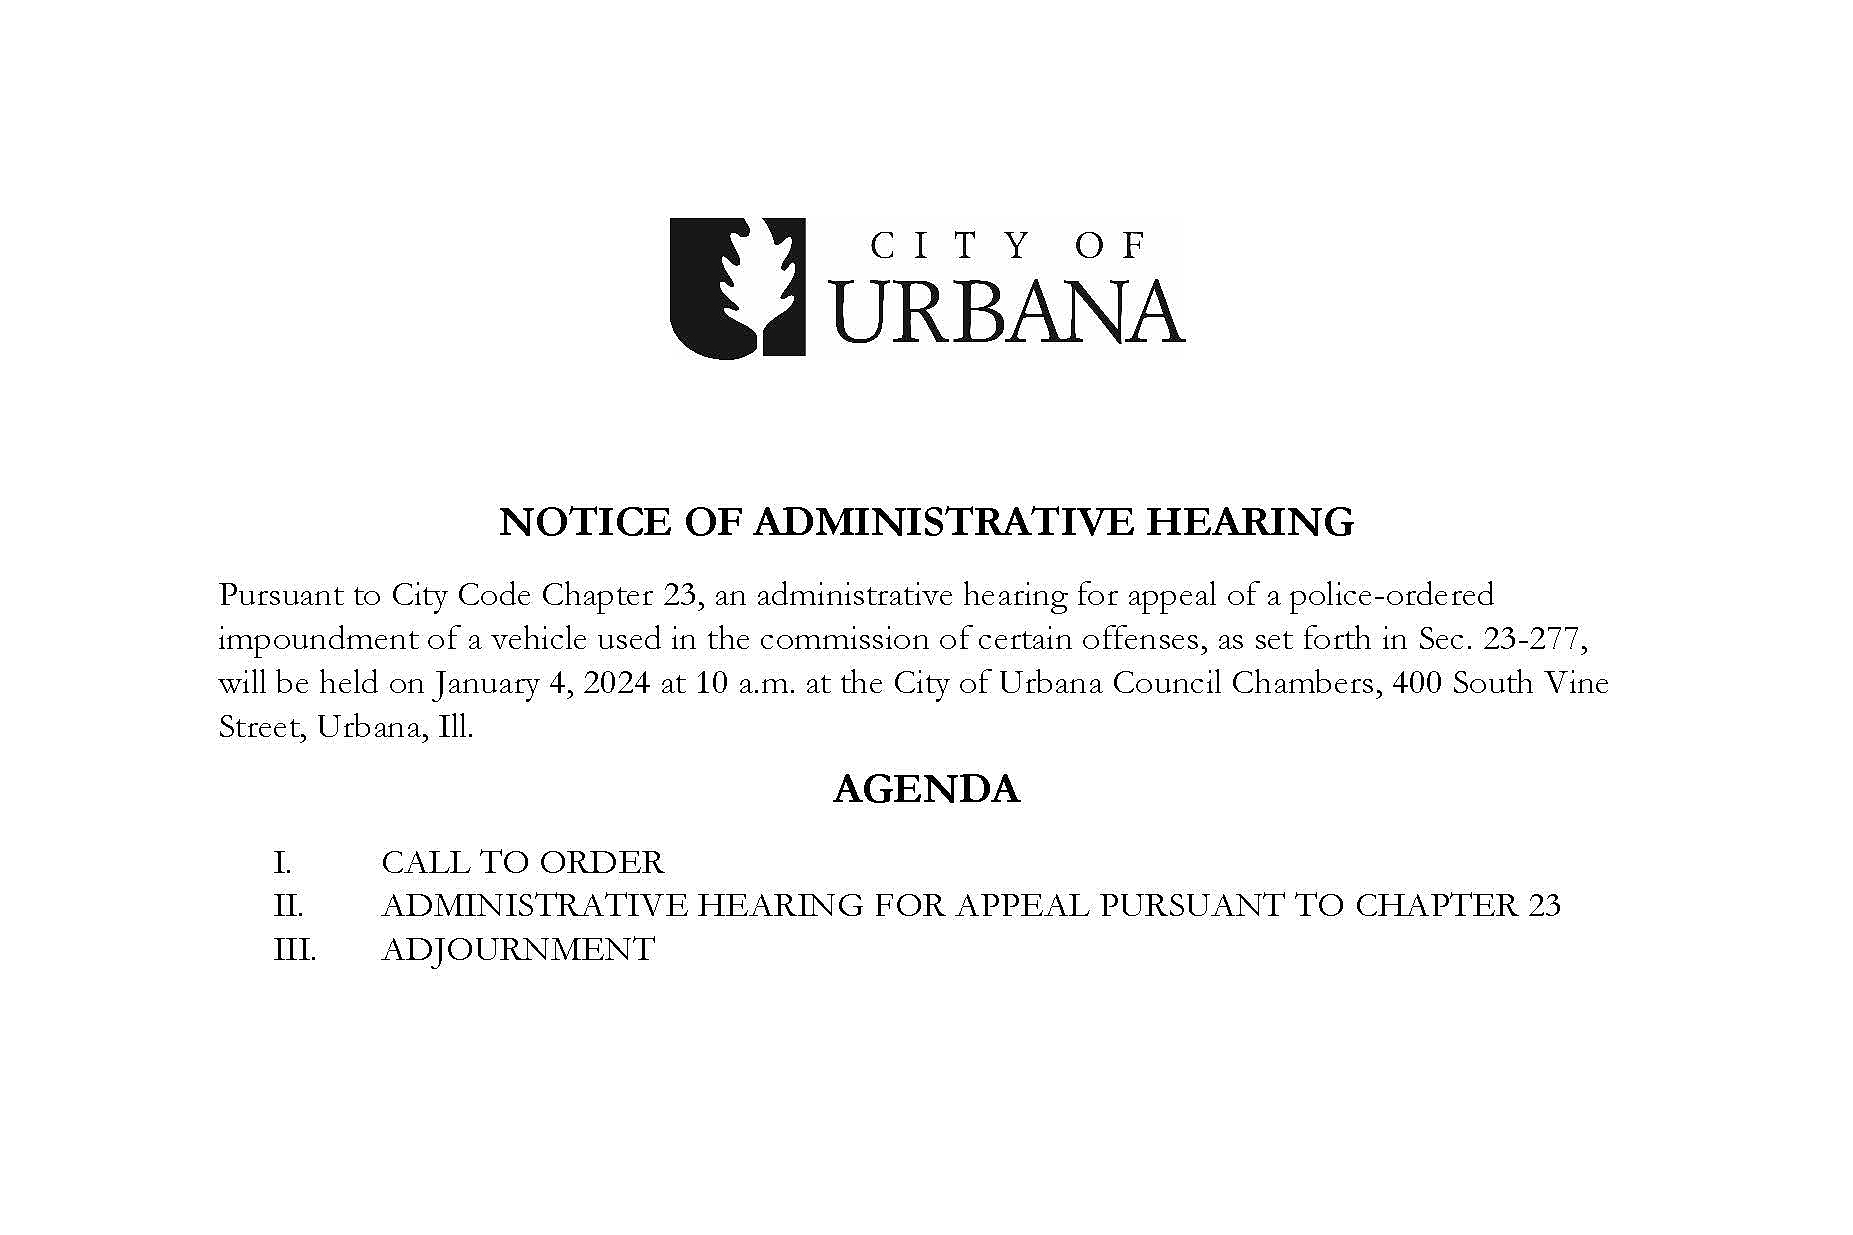 Notice of Administrative Hearing